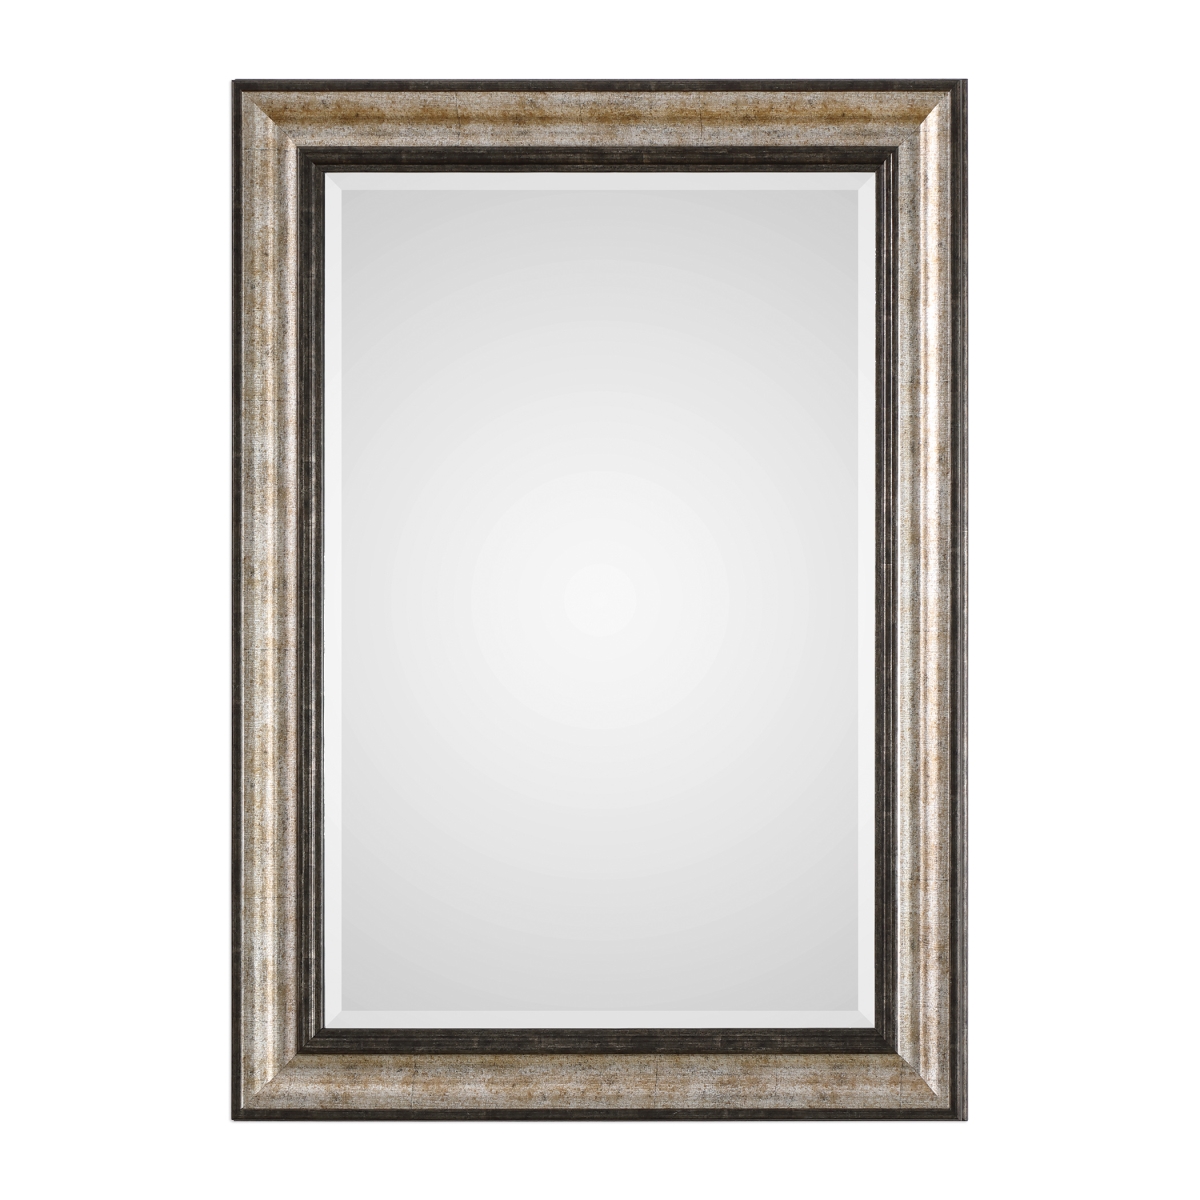 Picture of 212 Main 09366 Shefford Antiqued Silver Mirror